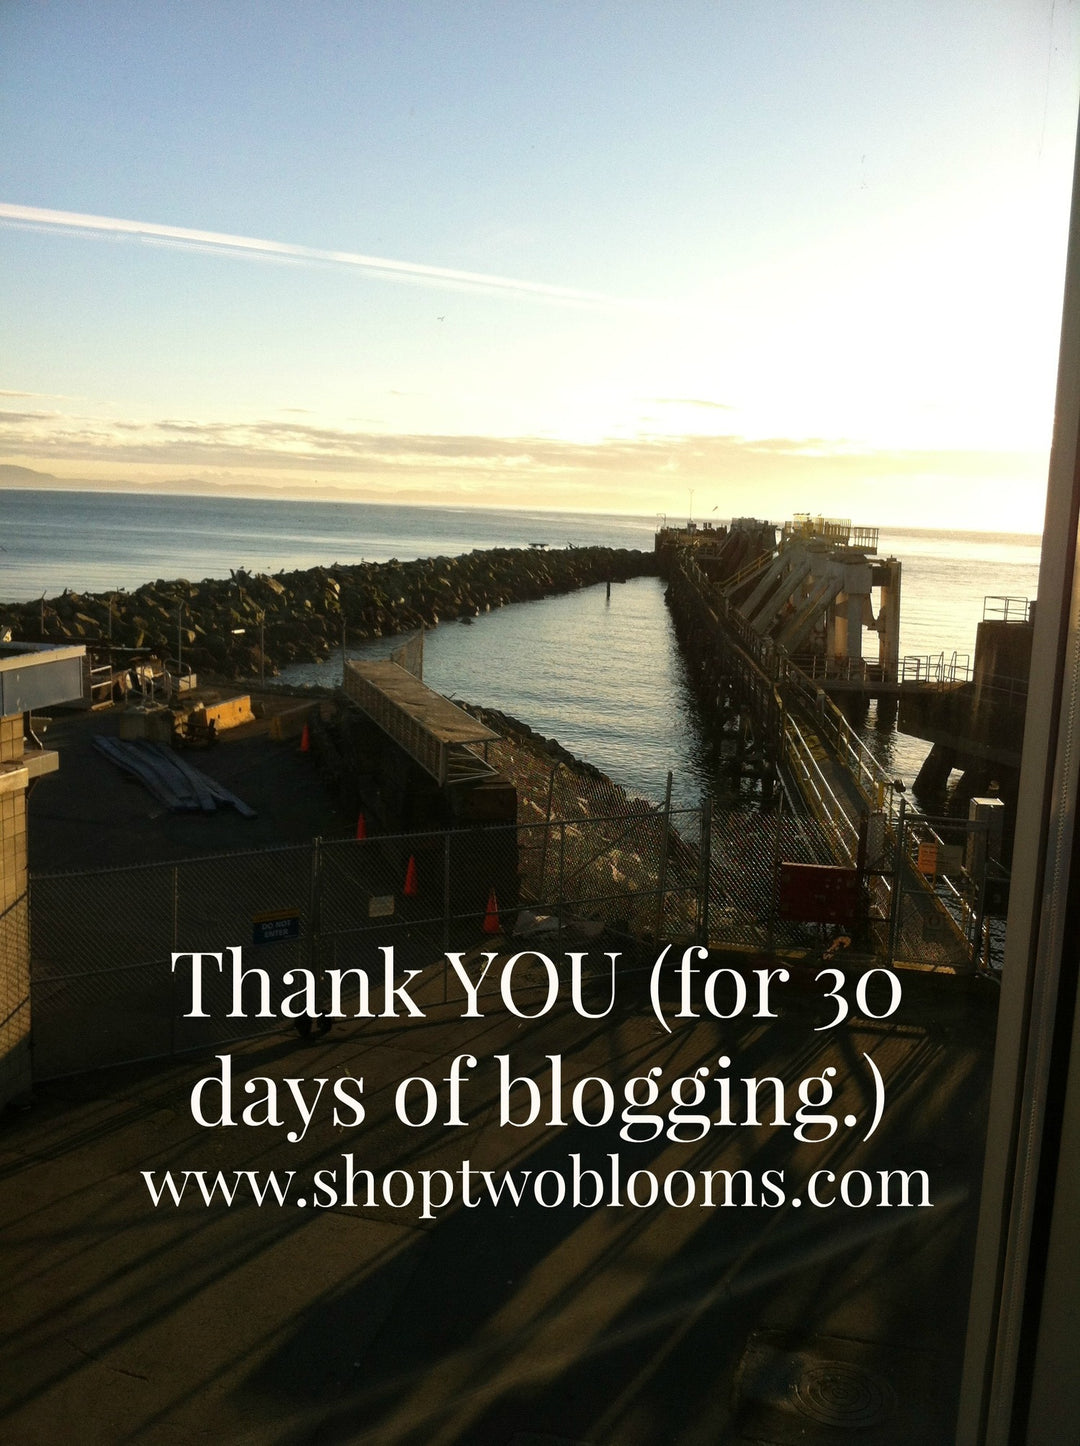 Thank you for 30 days of blogging